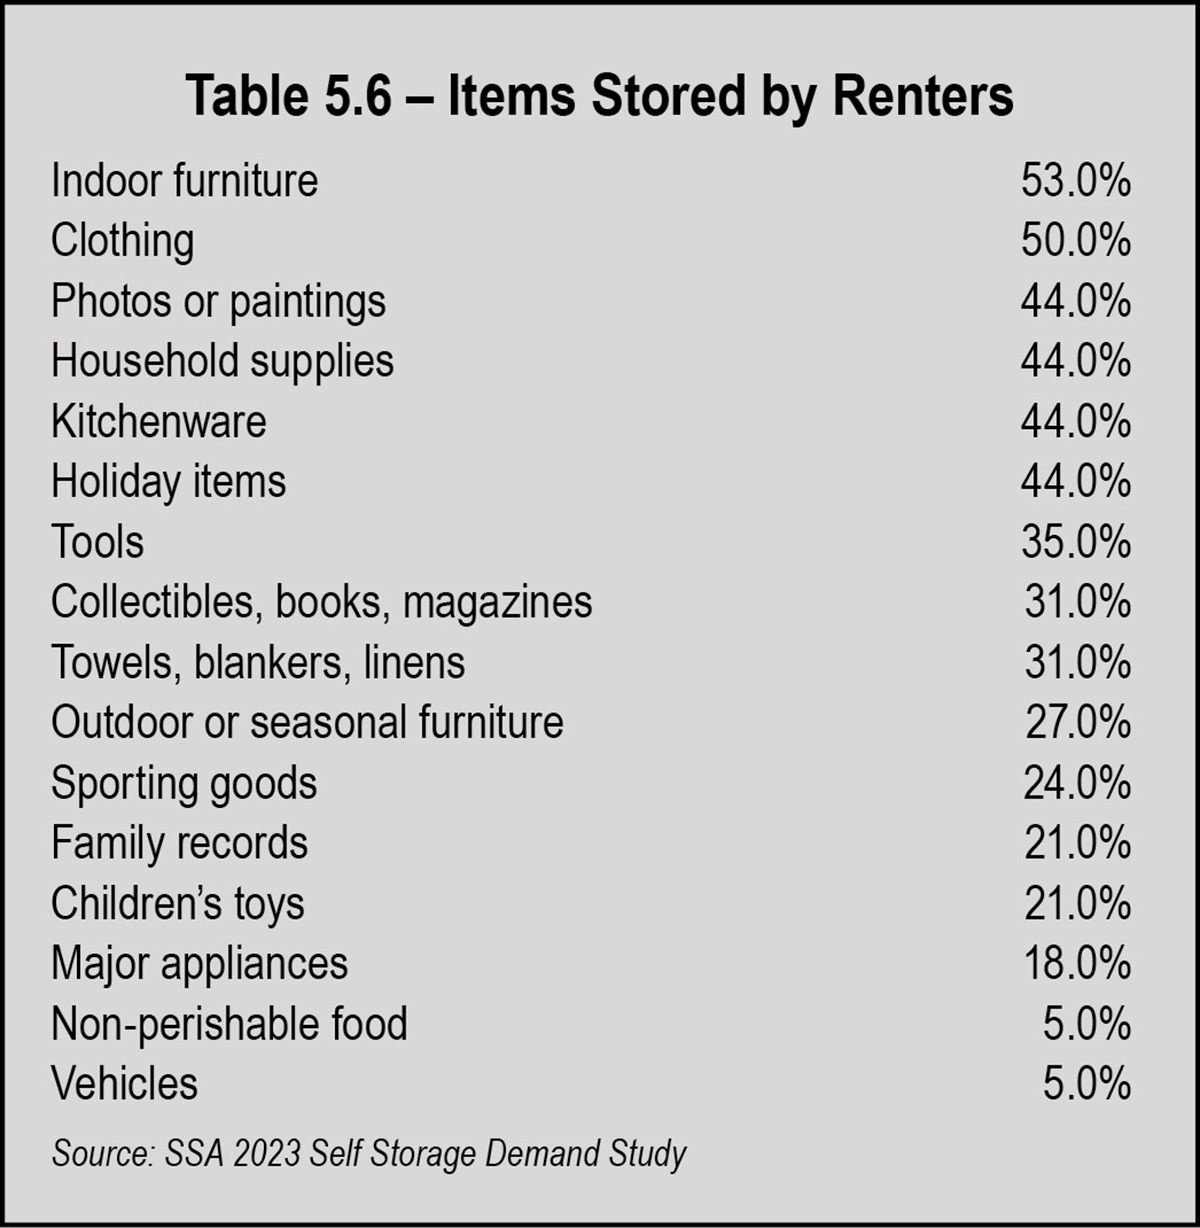 Table 5.6 – Items Stored by Renters